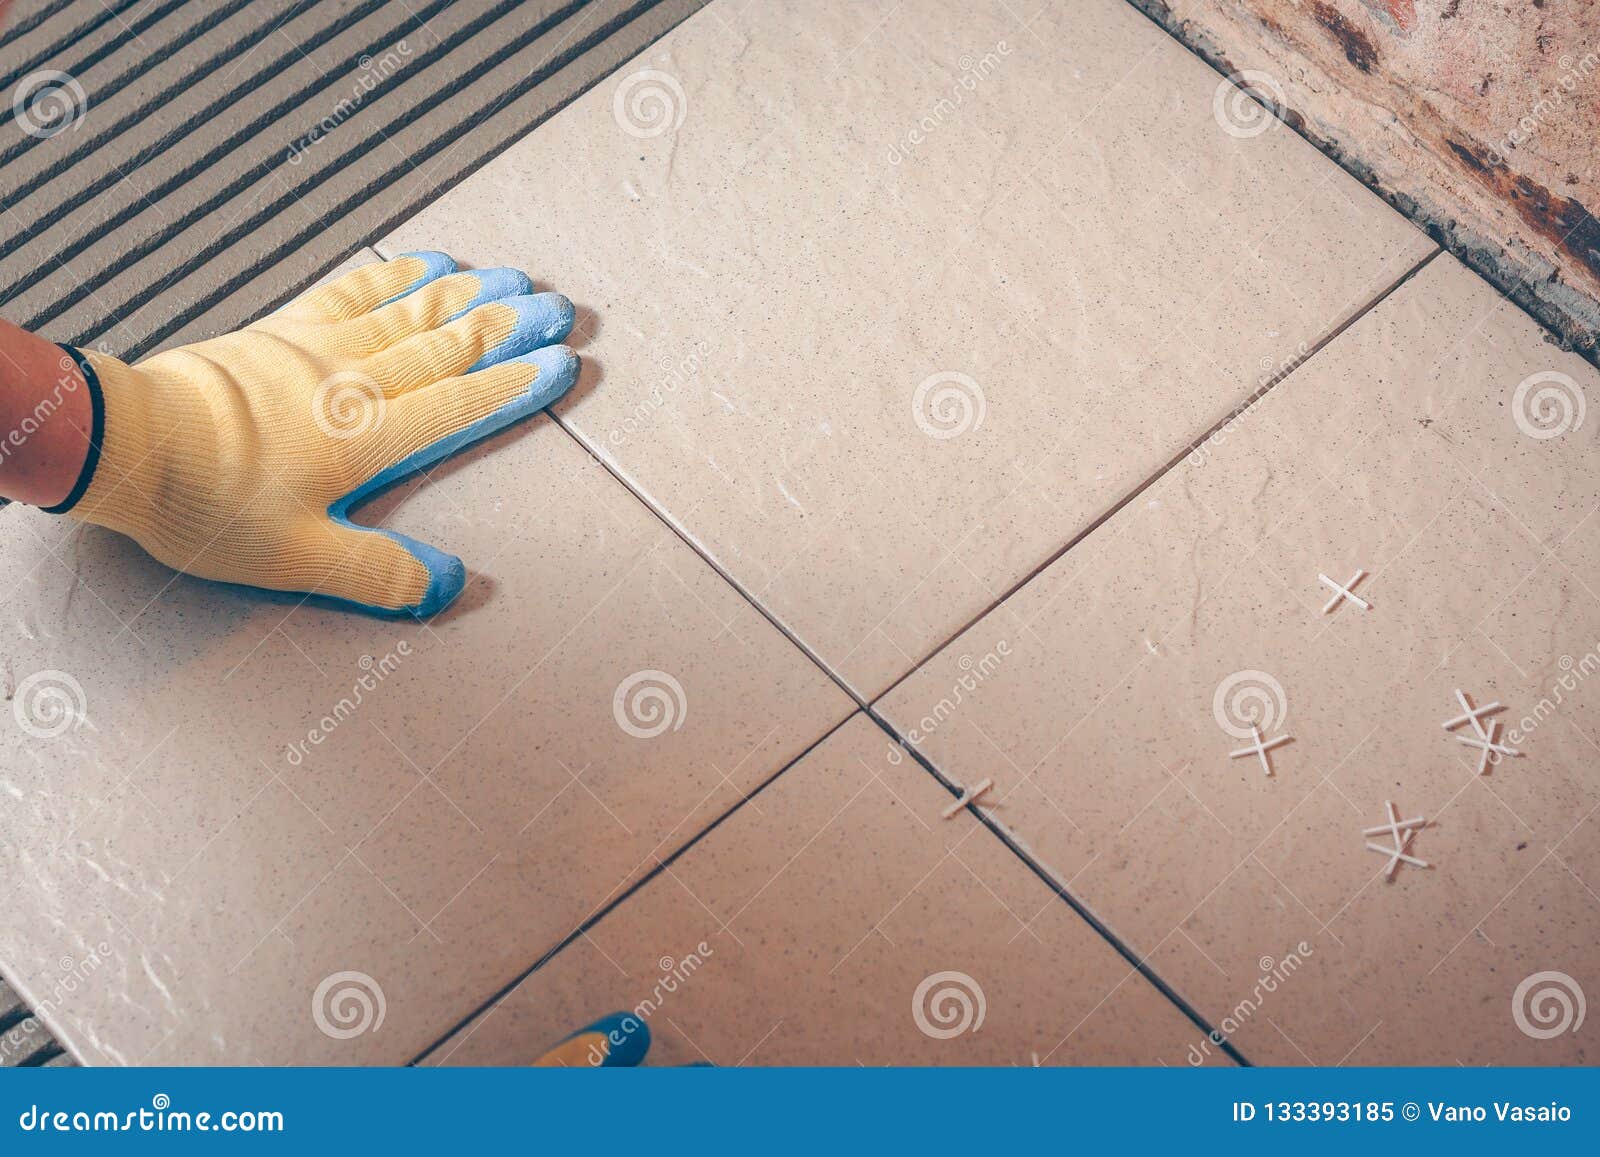 the worker professionally puts the tile